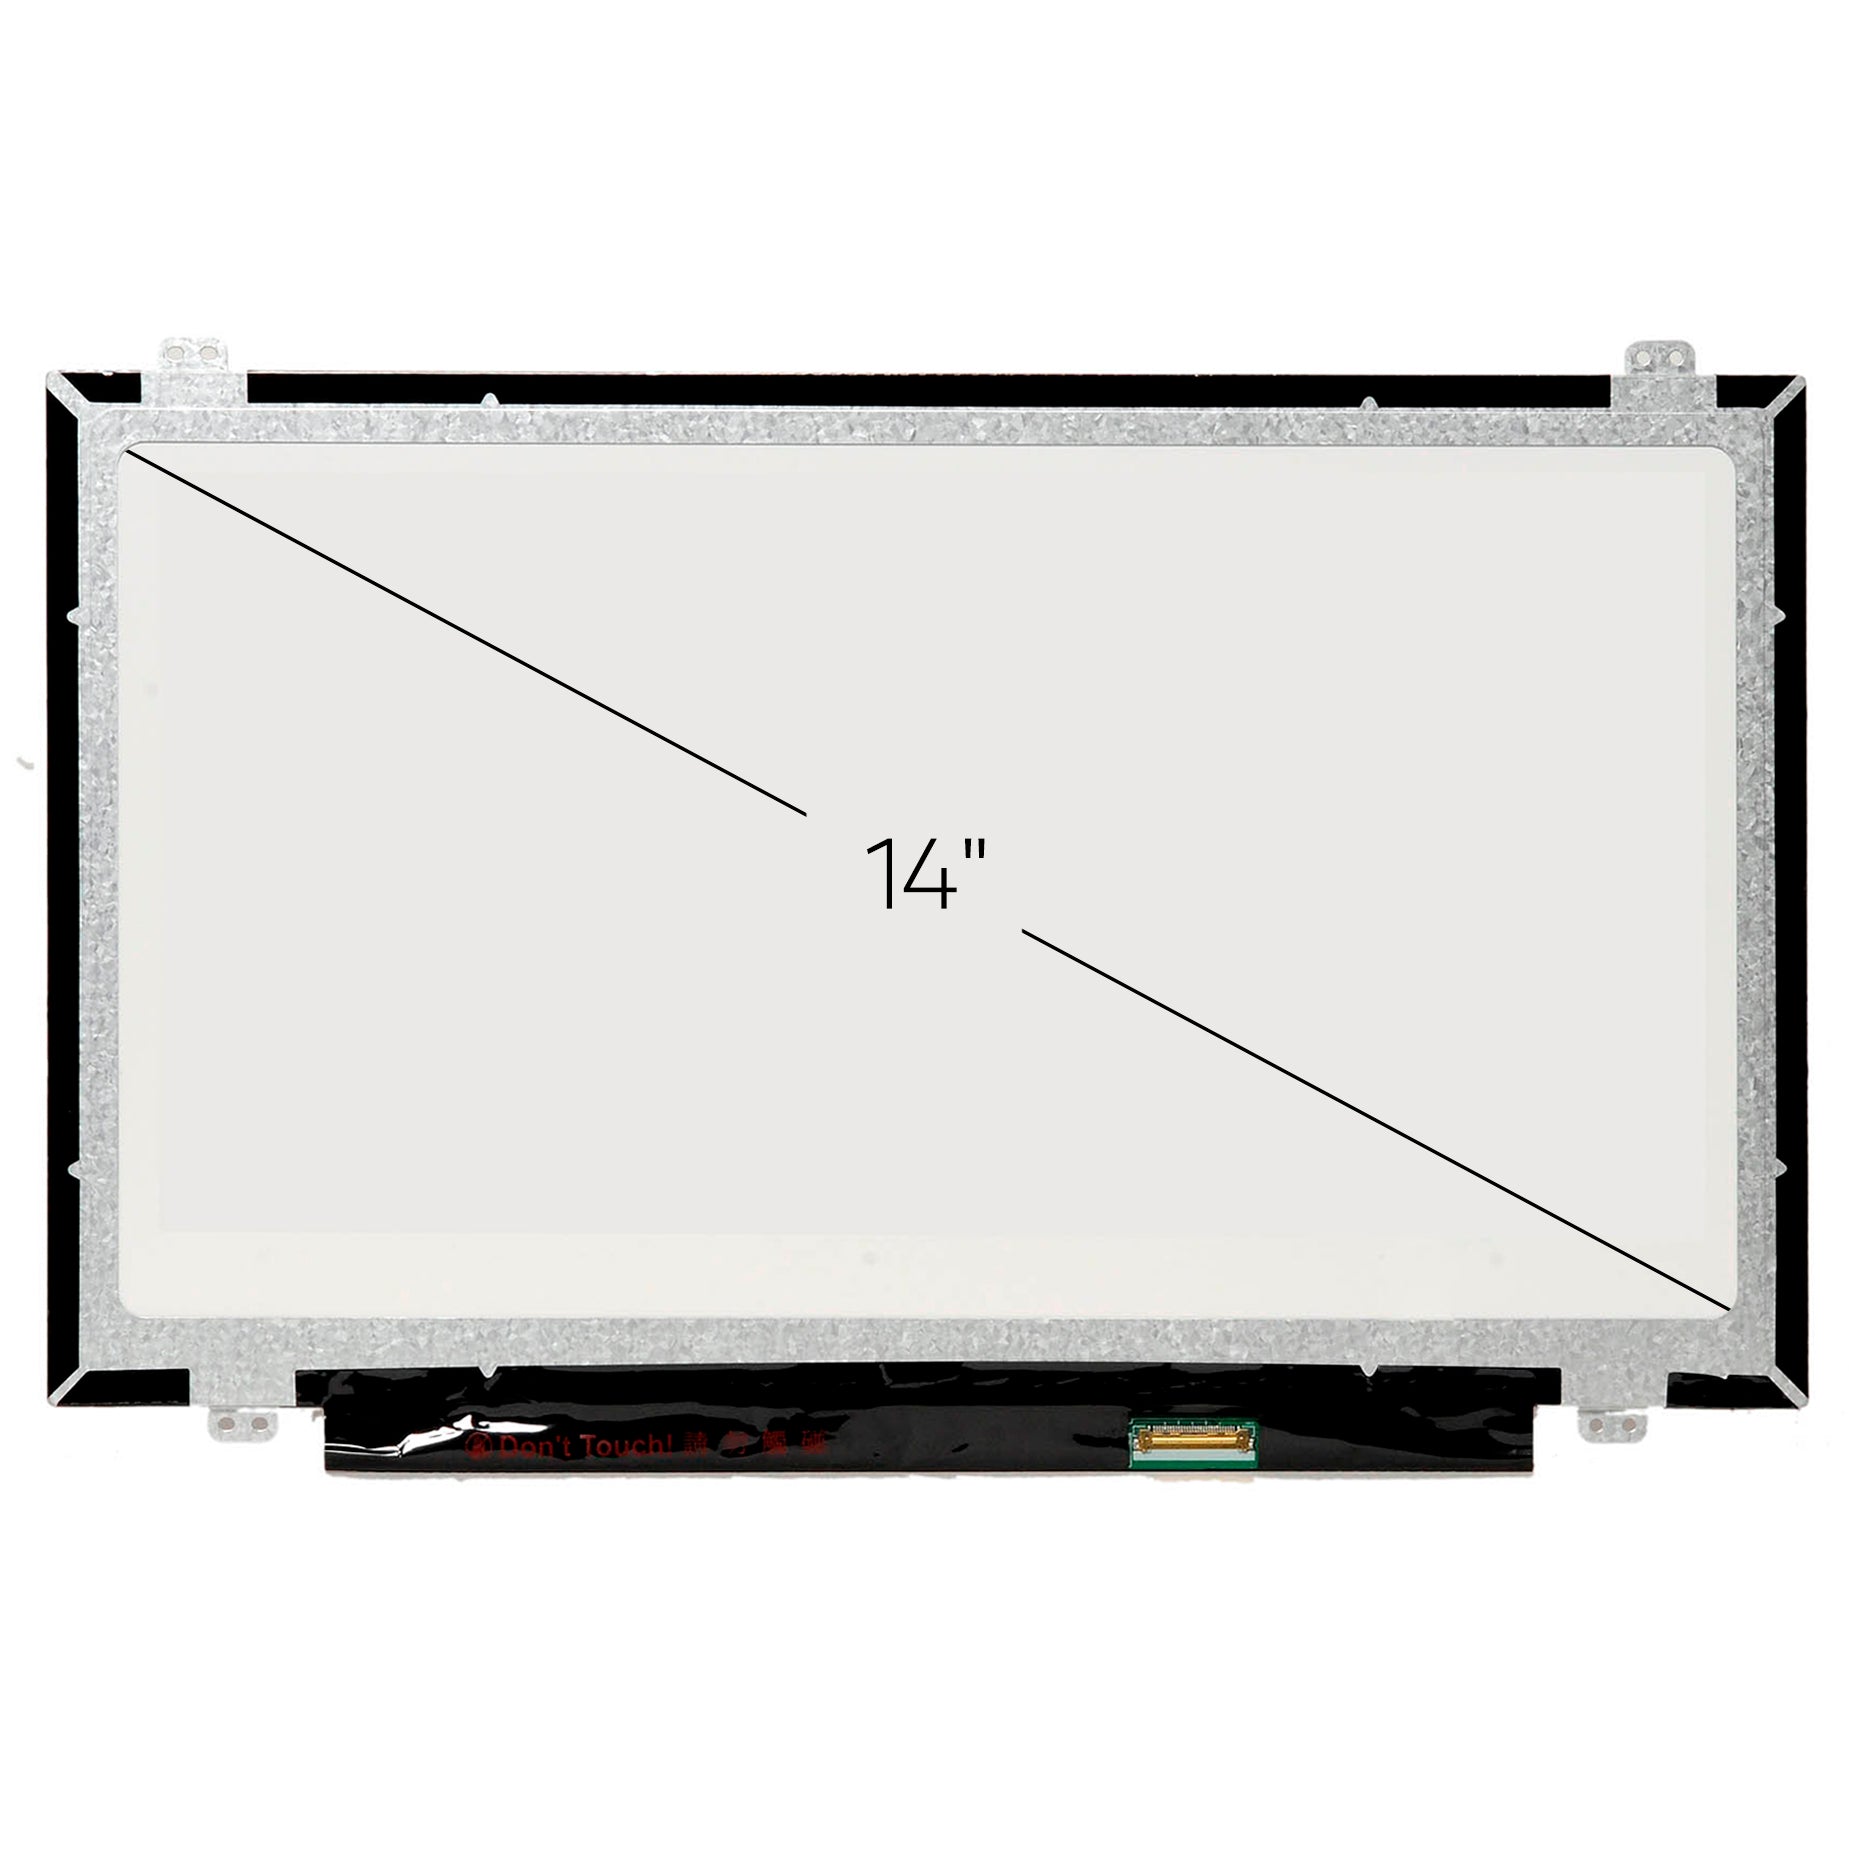 Screen Replacement for HP P/N L01104-001 HD 1366x768 Glossy LCD LED Display